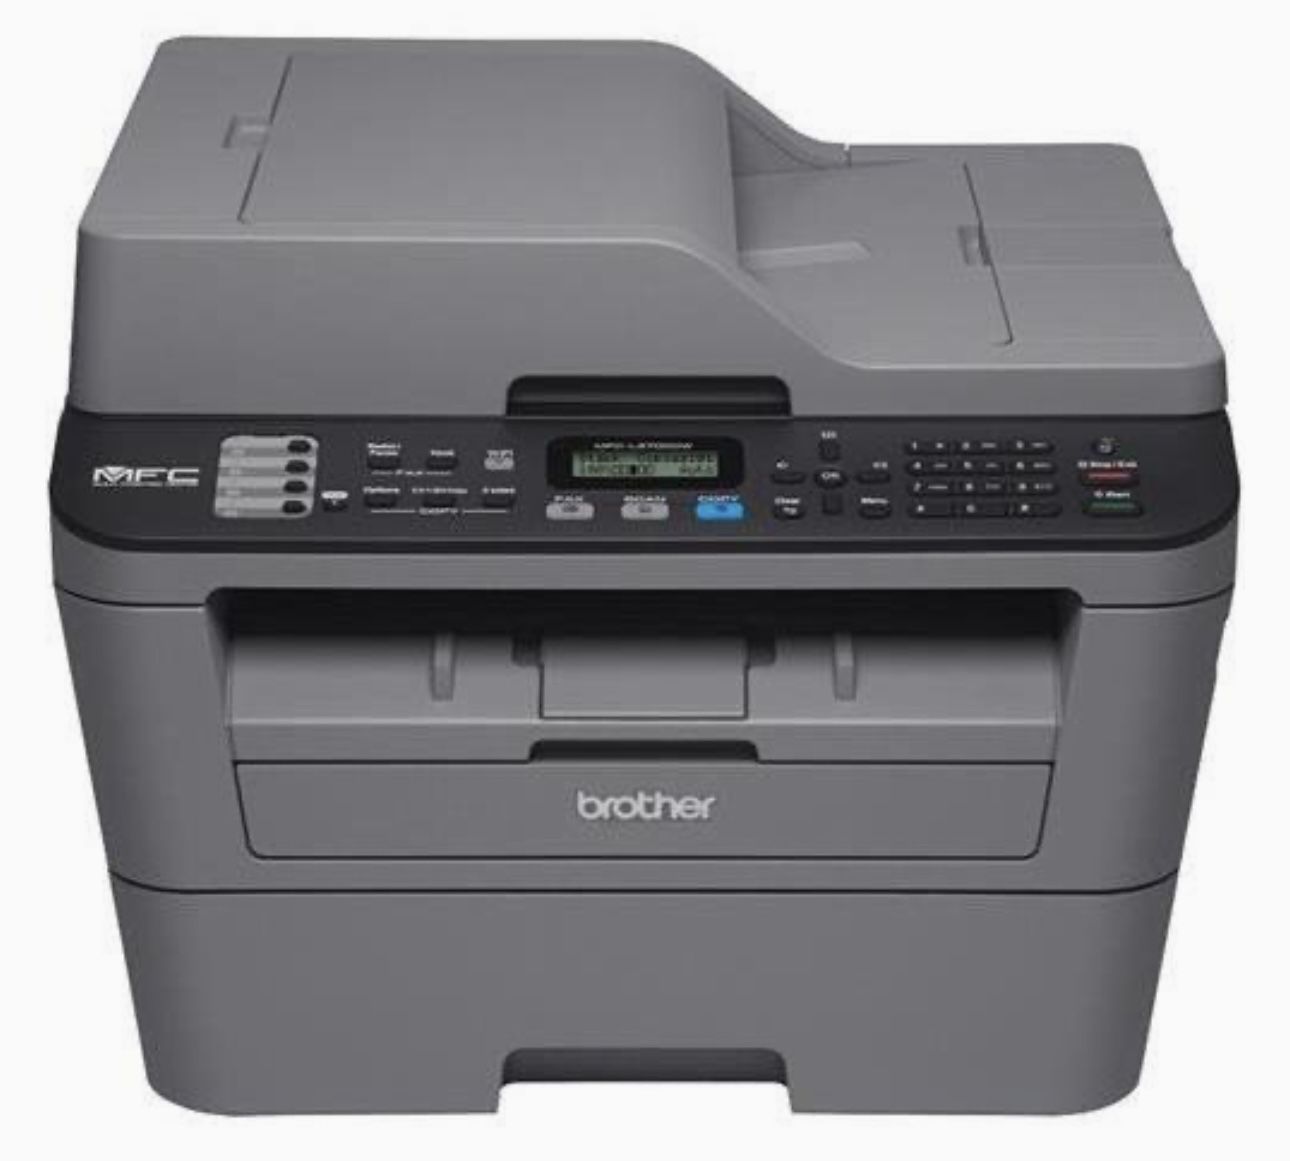 Brother MFL-L2700DW, All In One Laser Printer, Wireless, Scans, Copies, Prints And Faxes.